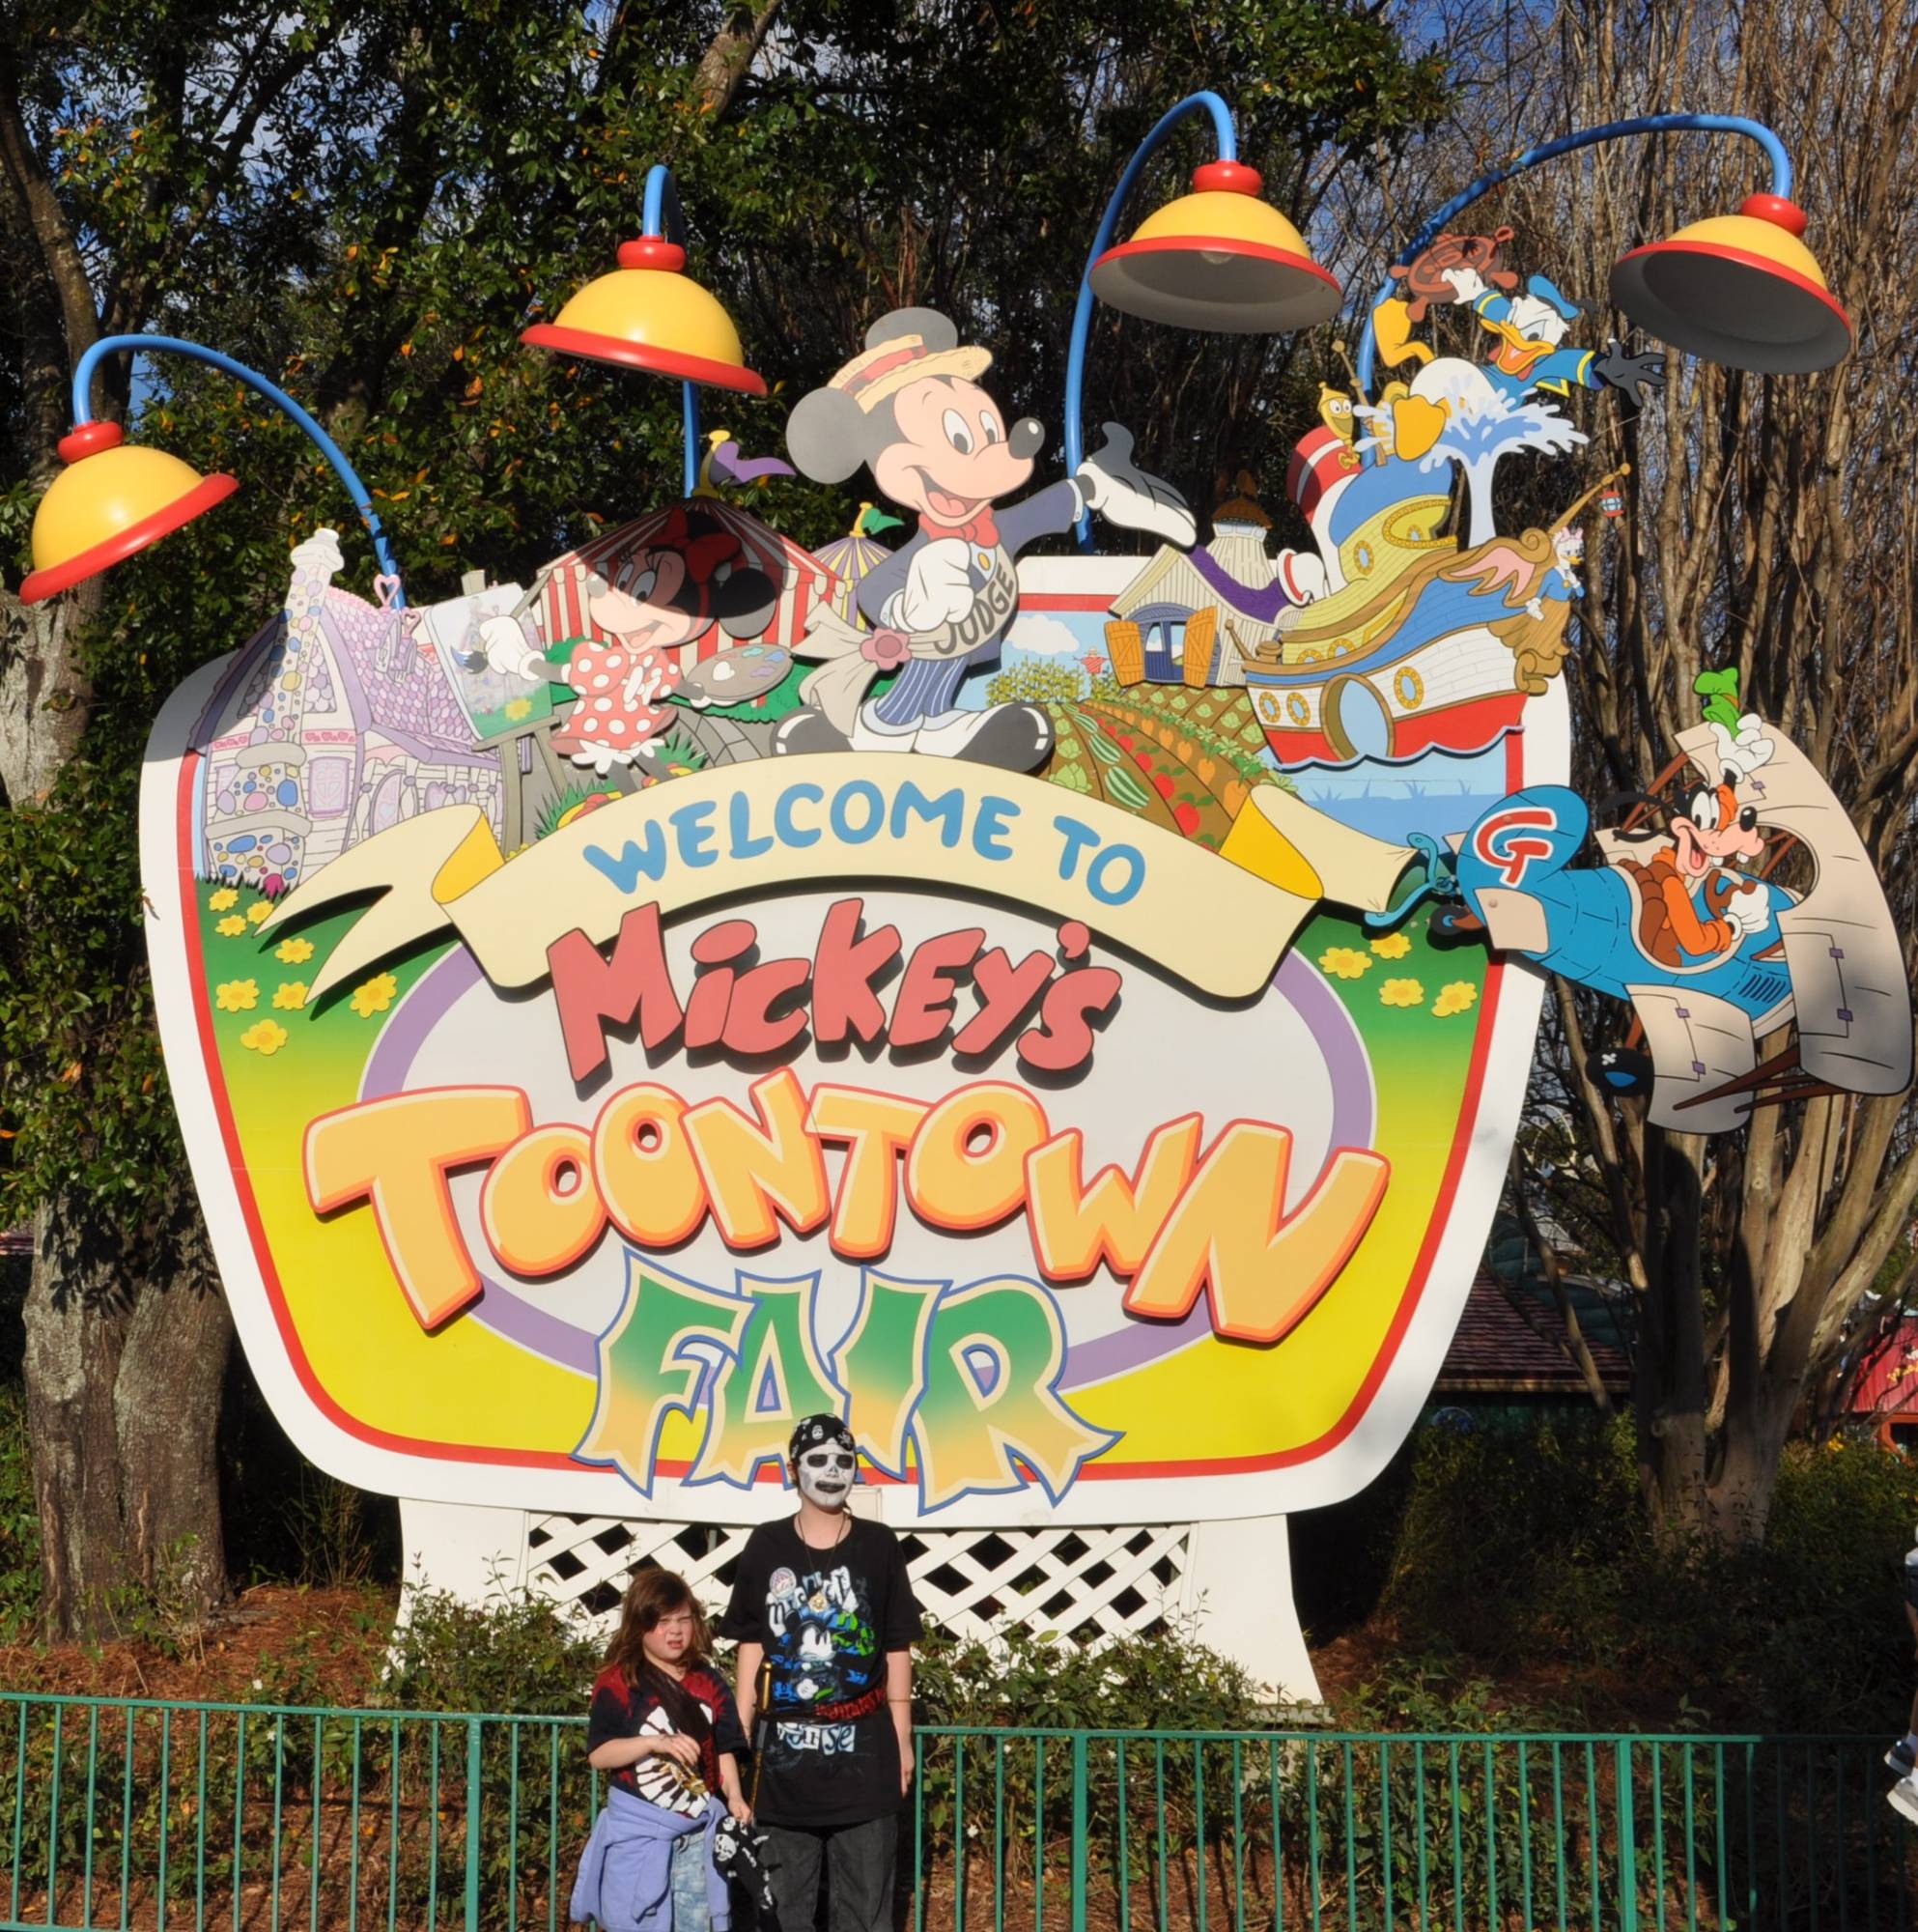 Entrance to Toontown